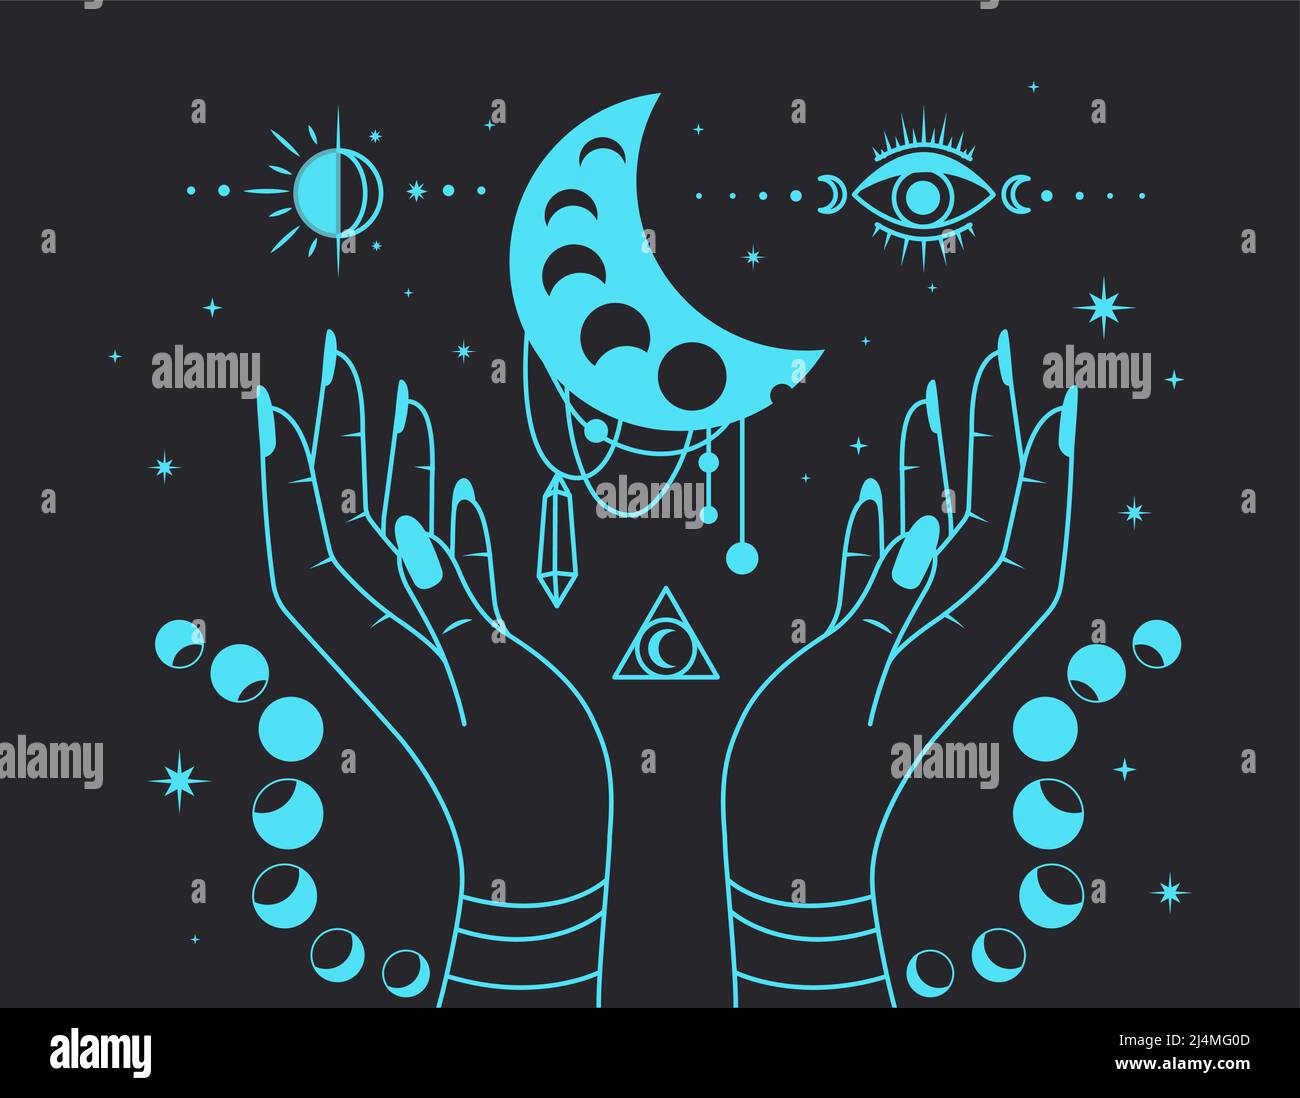 Esoteric, spiritual, wicca occult inspired concept Stock Vector